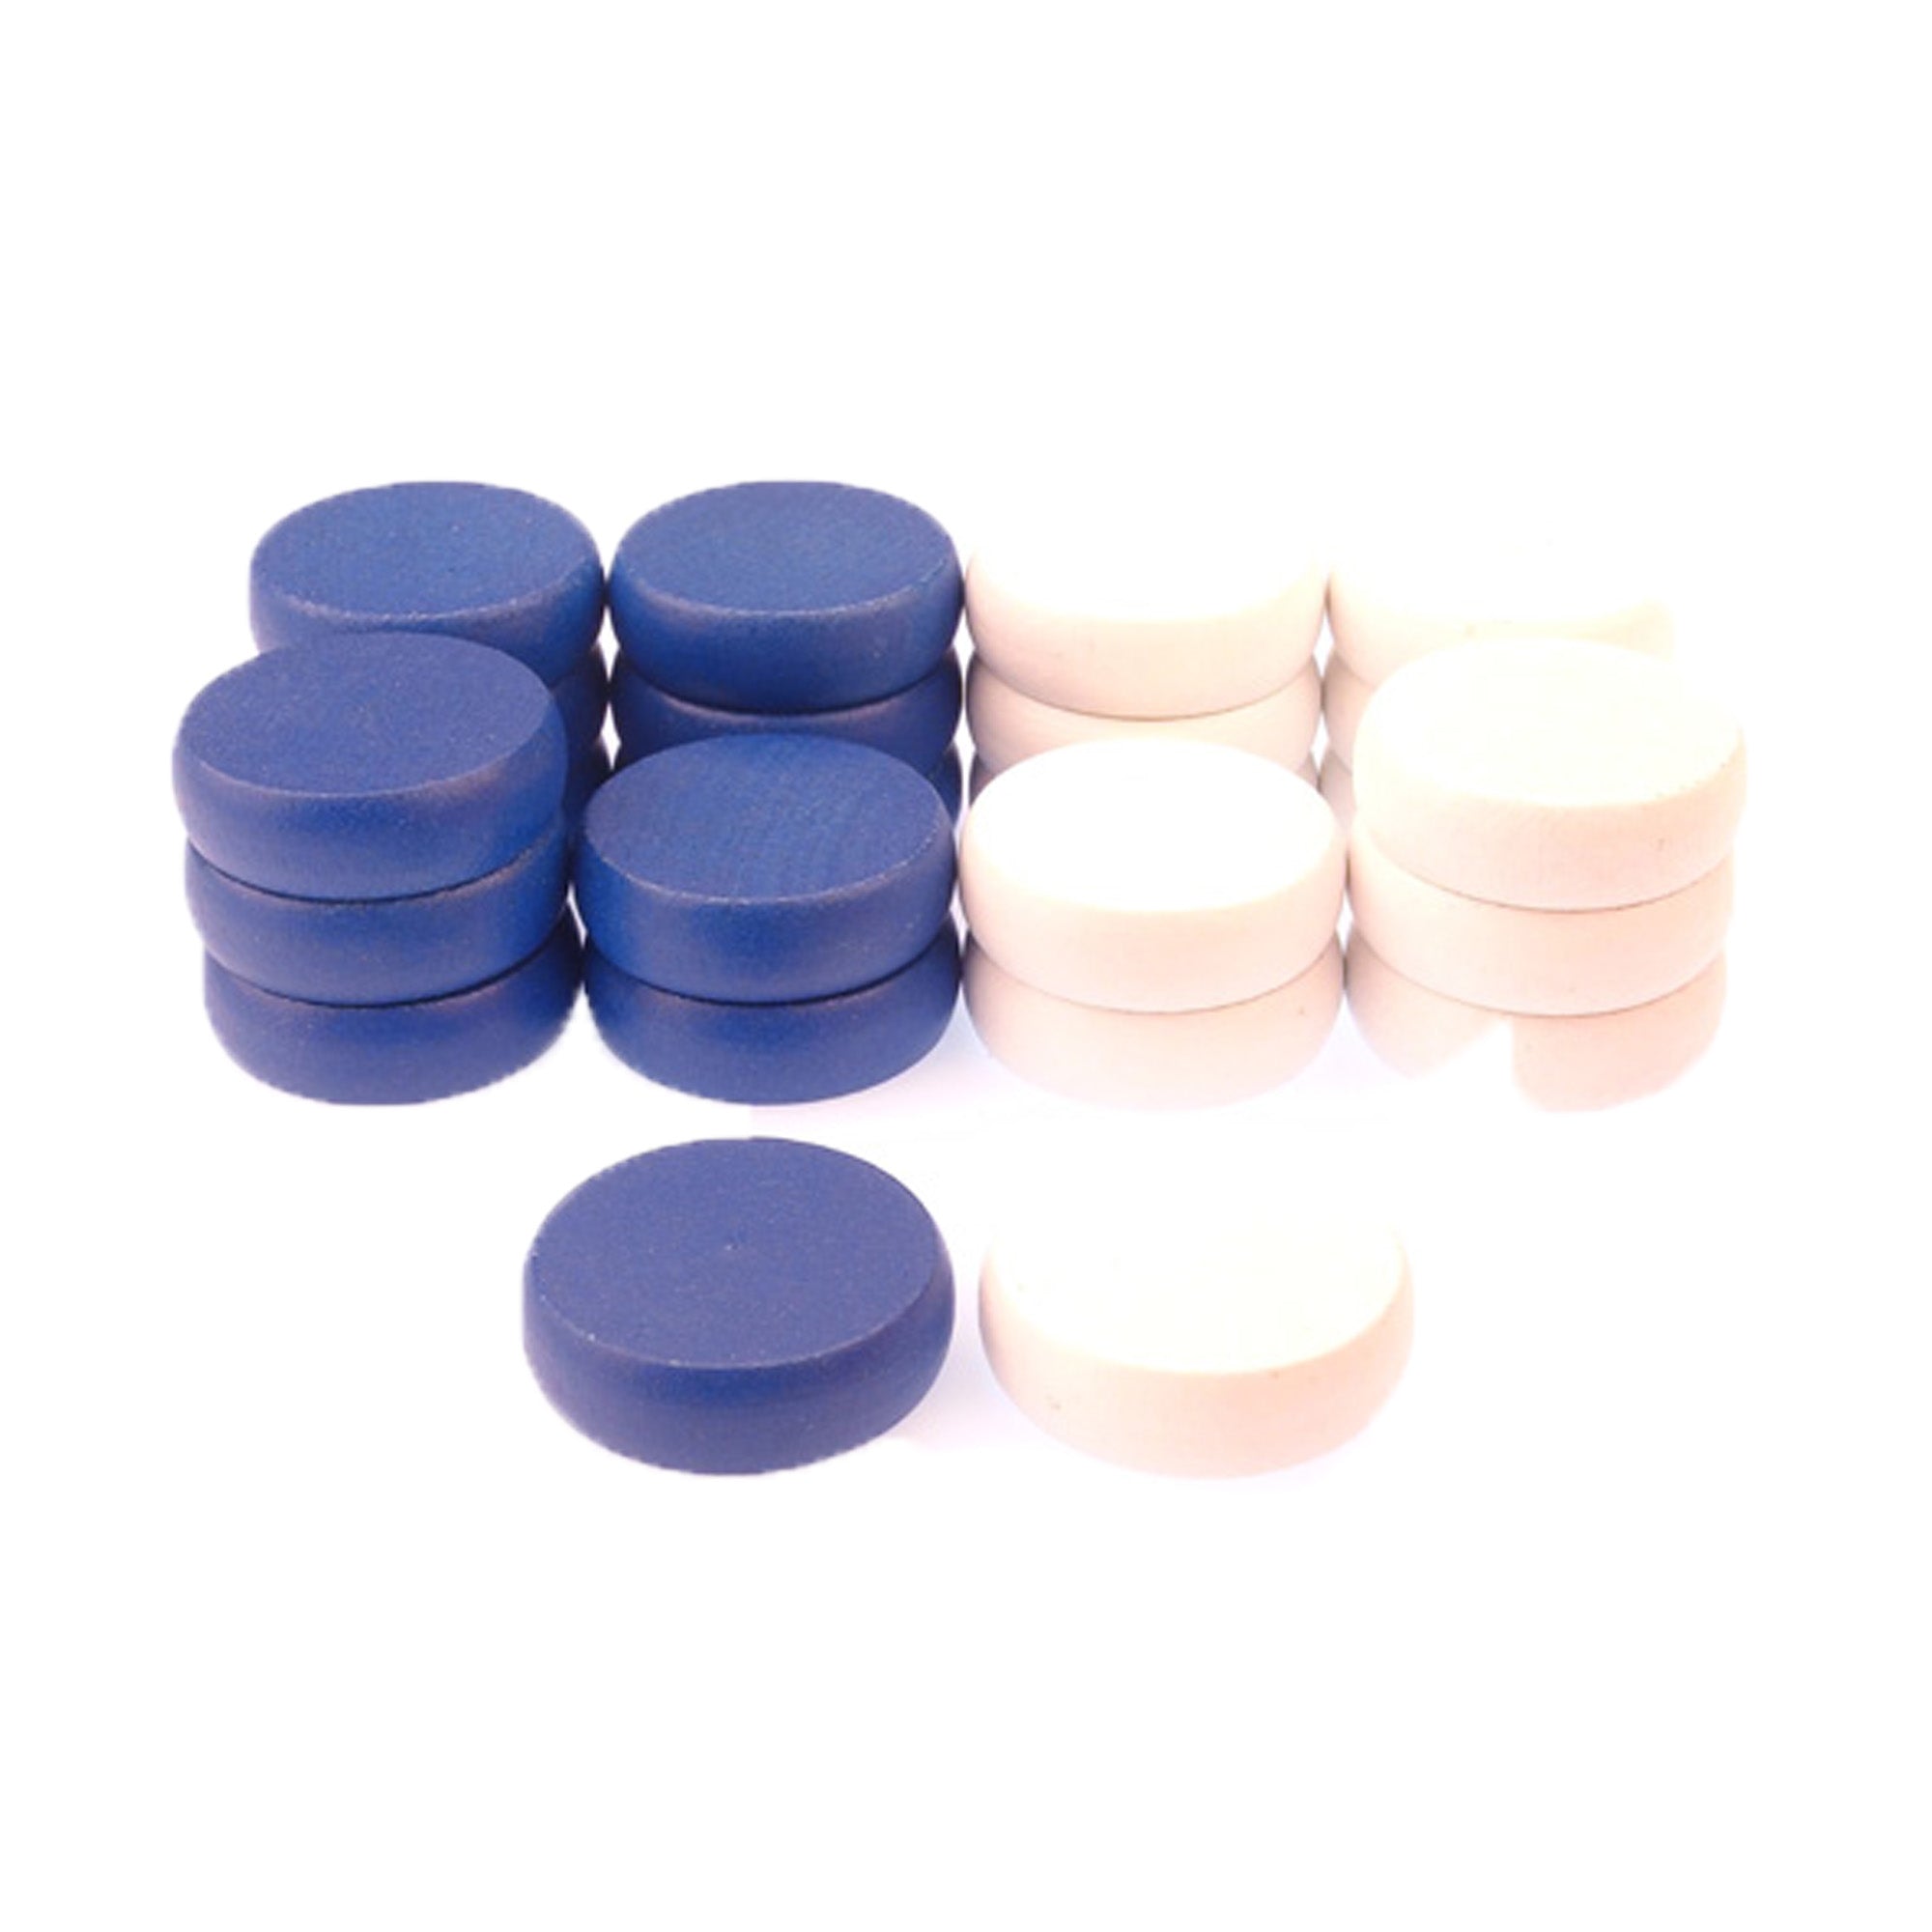 Crokinole Tournament Discs - 13 Blue and 13 White - Size 1-1/4" - 24 Needed + 2 Spare Discs - Bag Included - Carrom Alternative